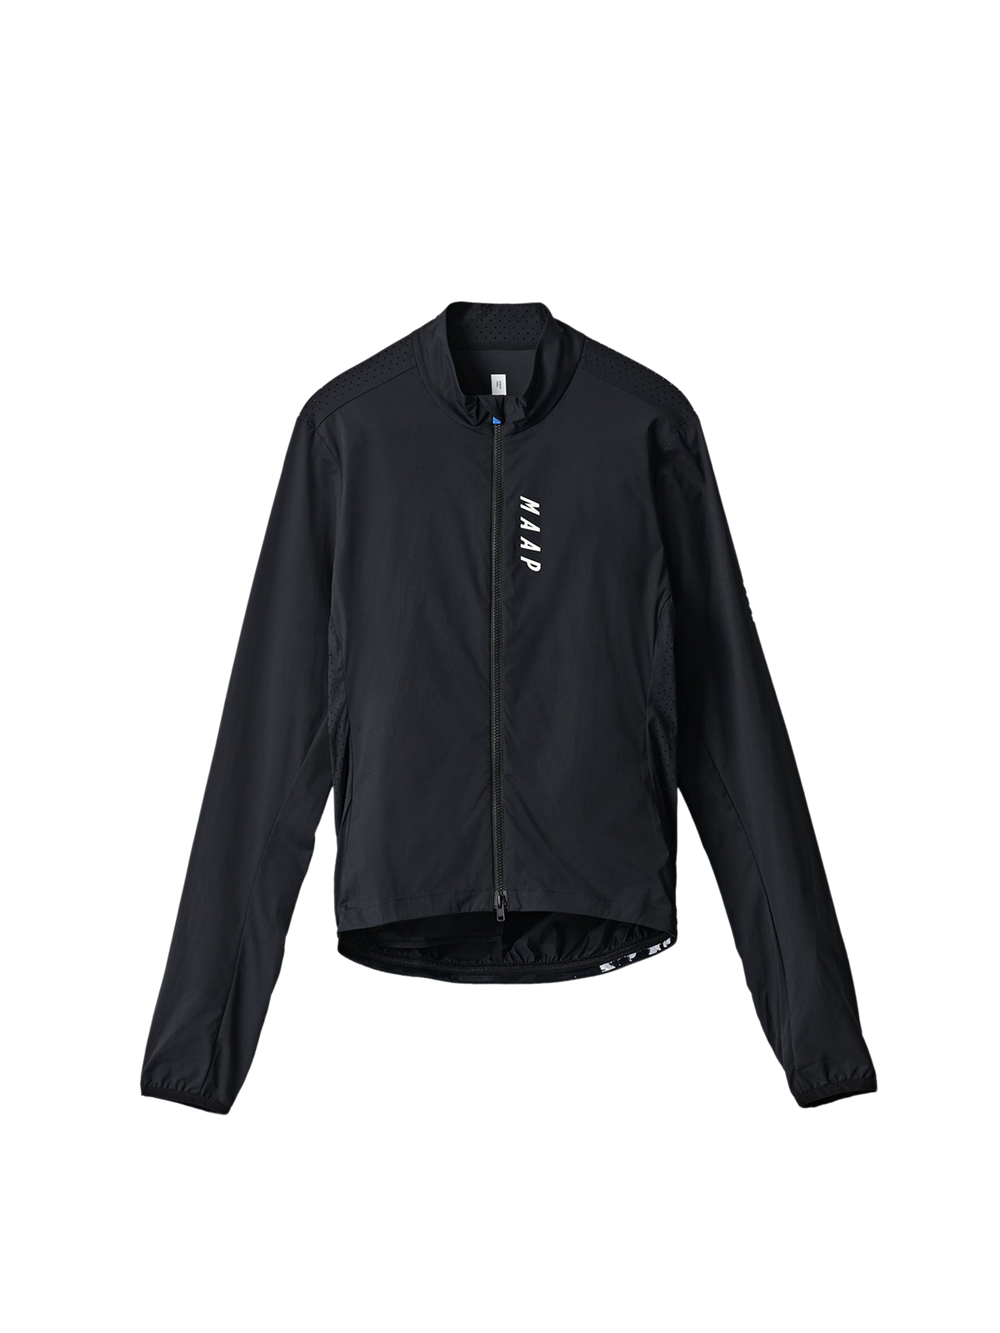 Product Image for Women's Draft Team Jacket